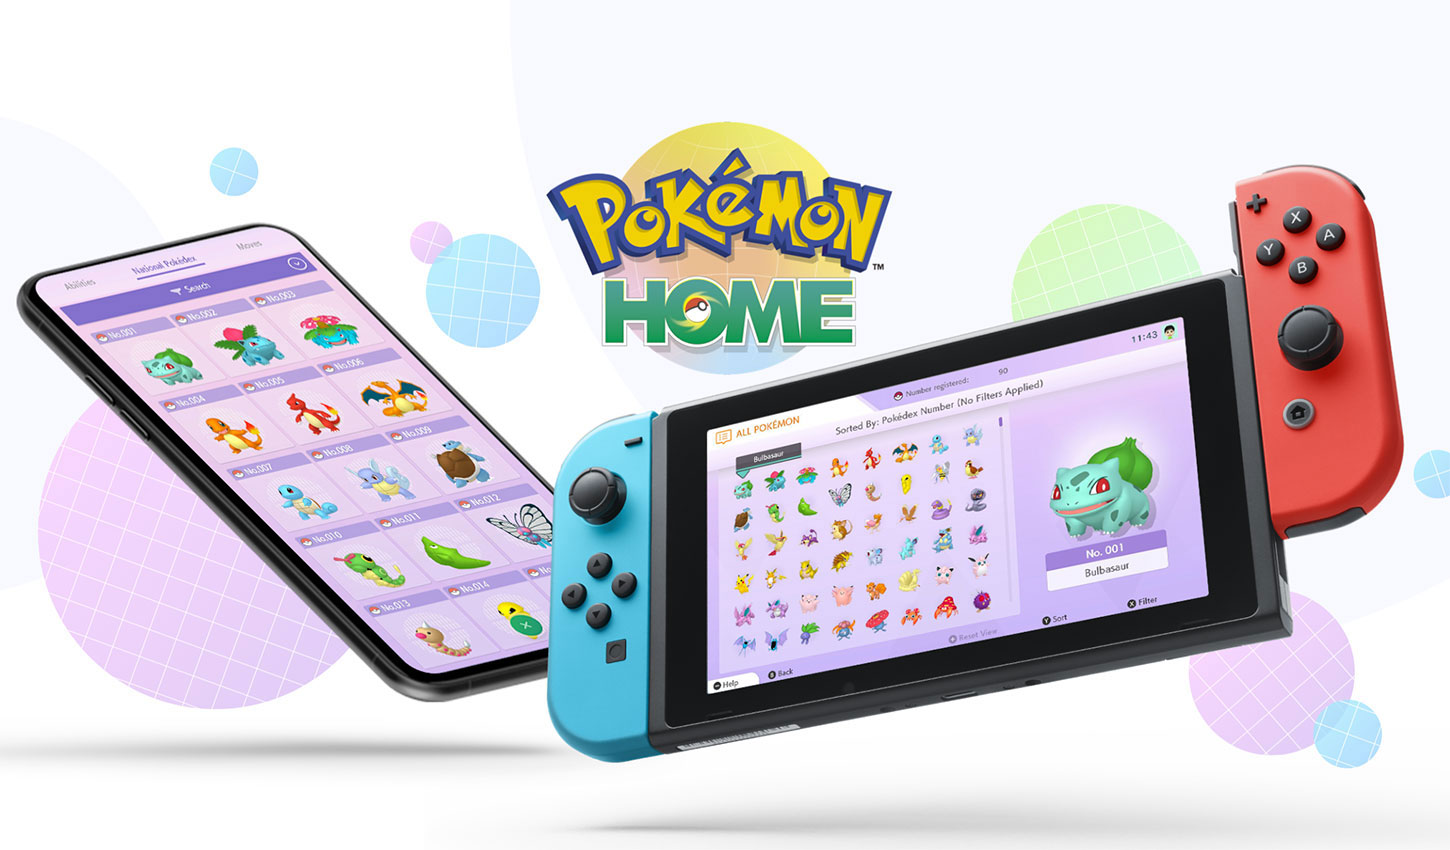 Pokémon Home Was Downloaded 1.3 Million Times in Its First Week